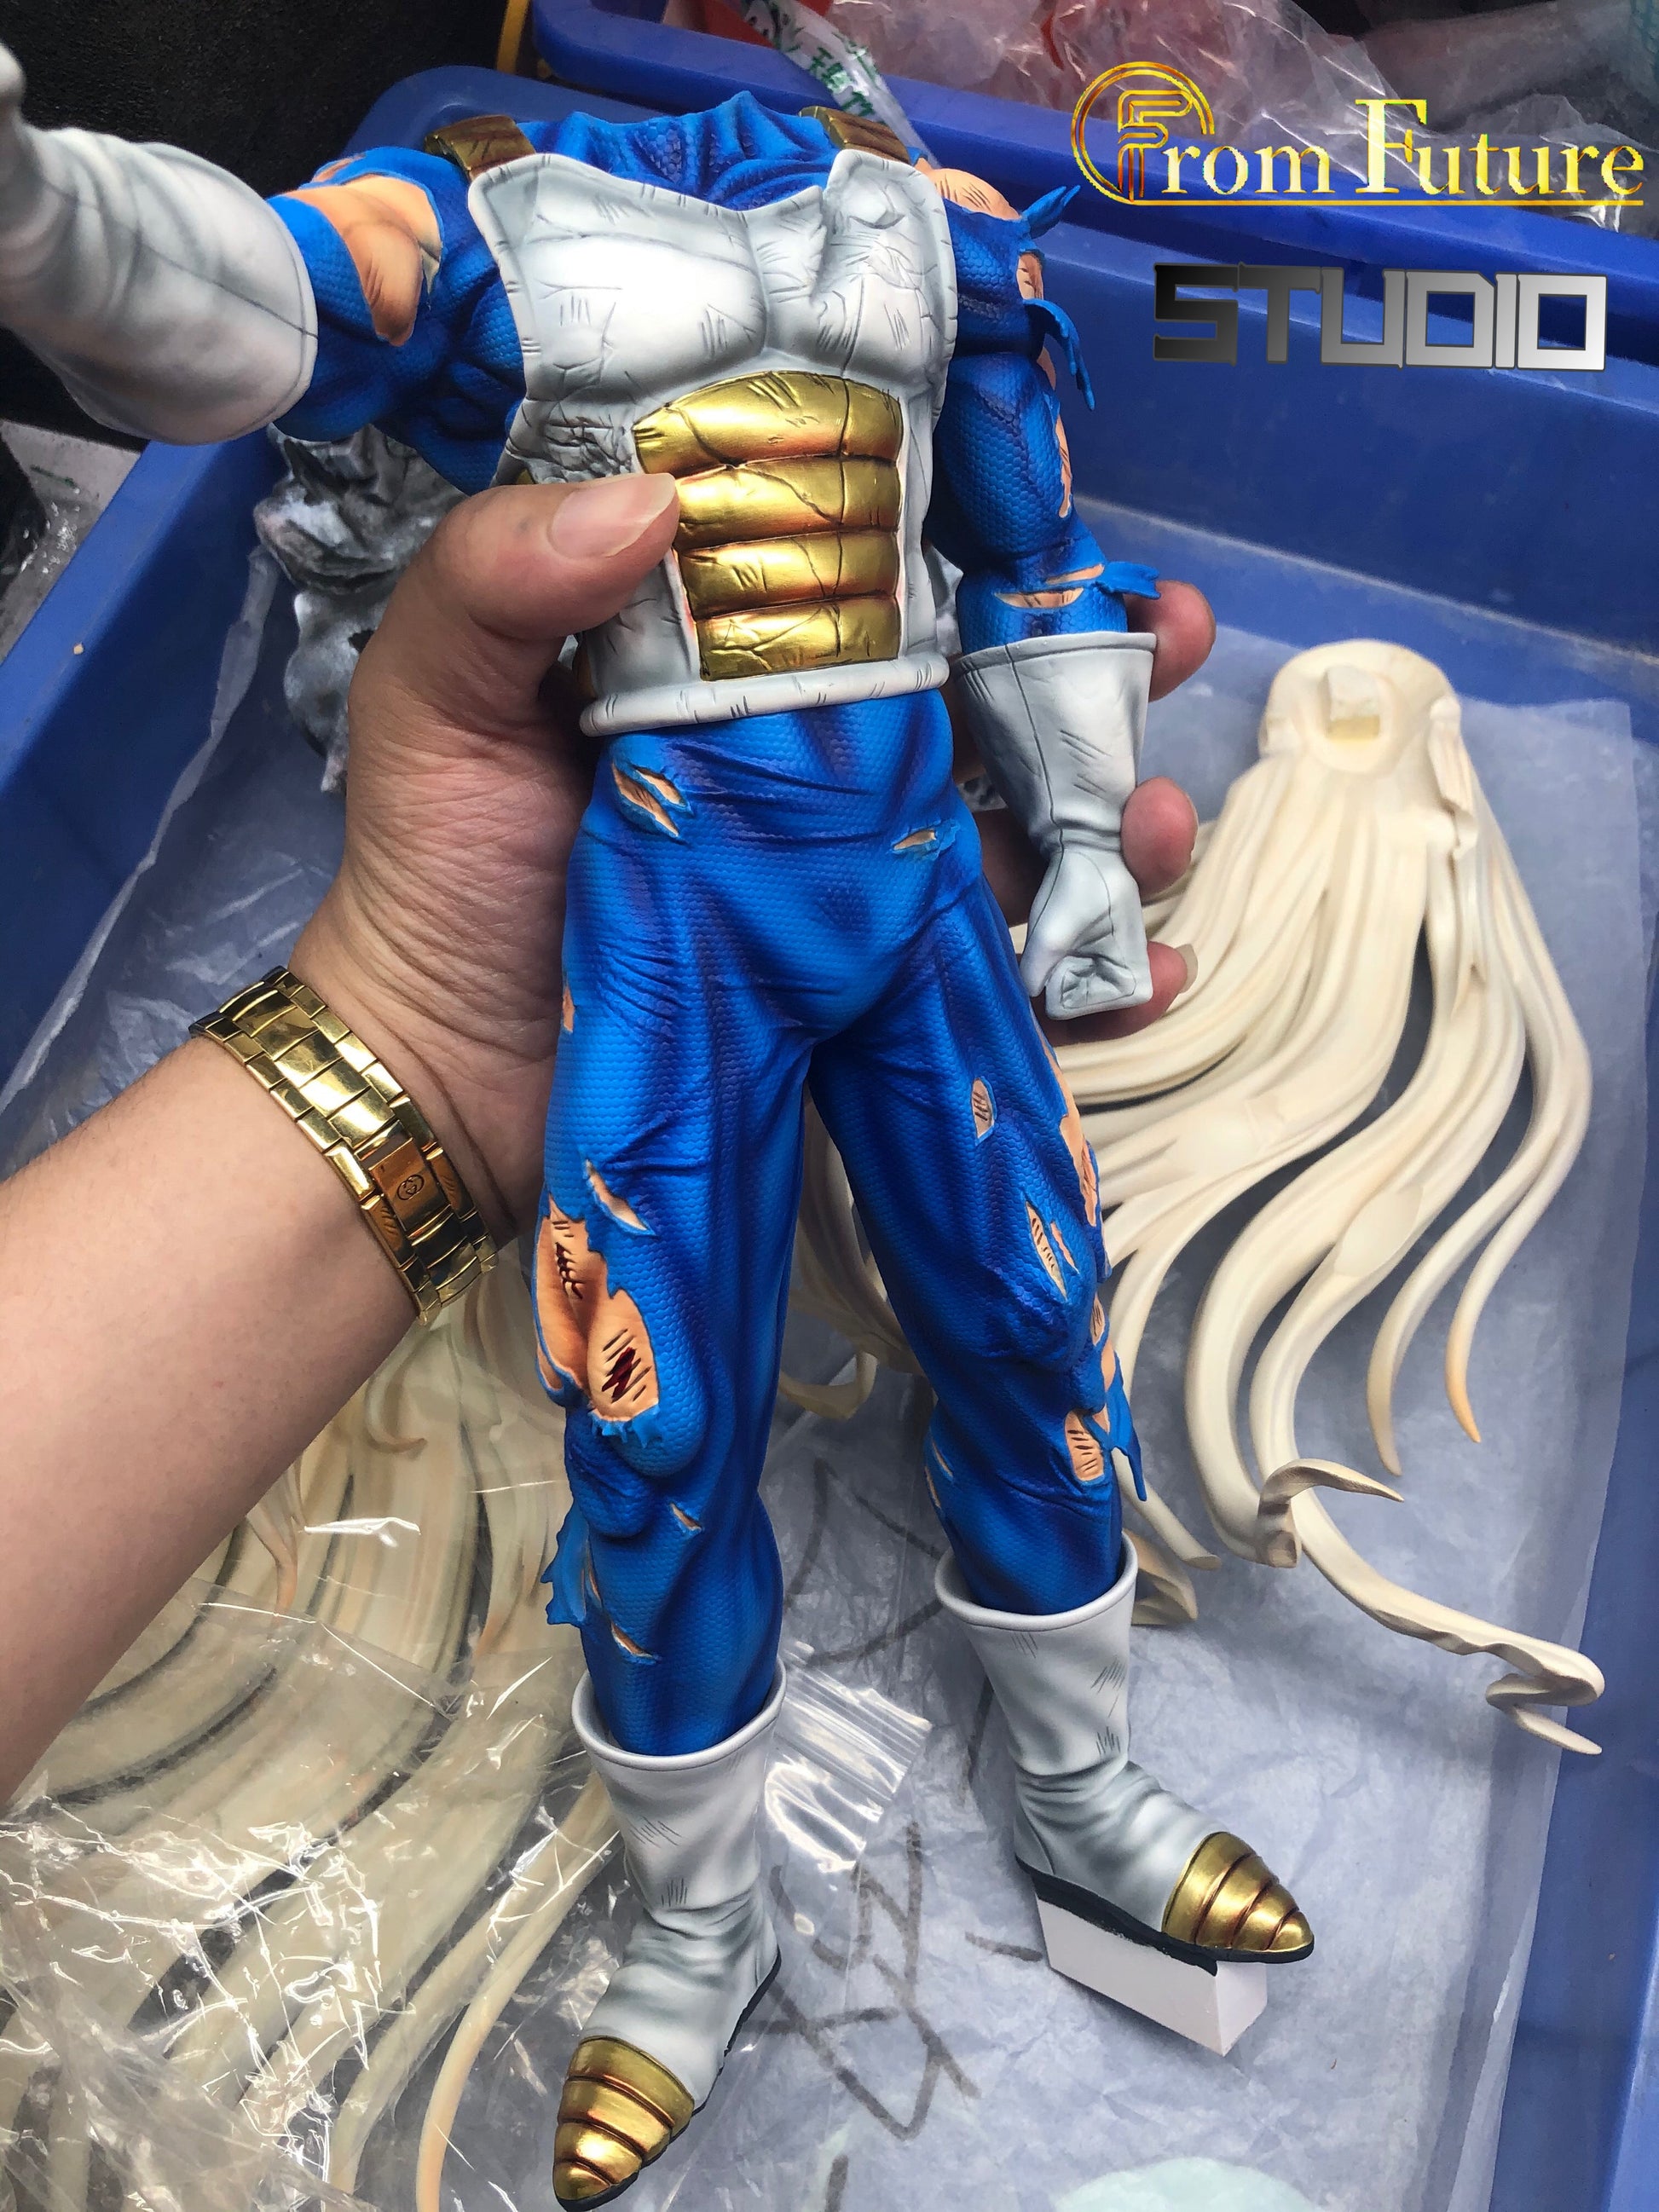 From Future - Trunks StatueCorp